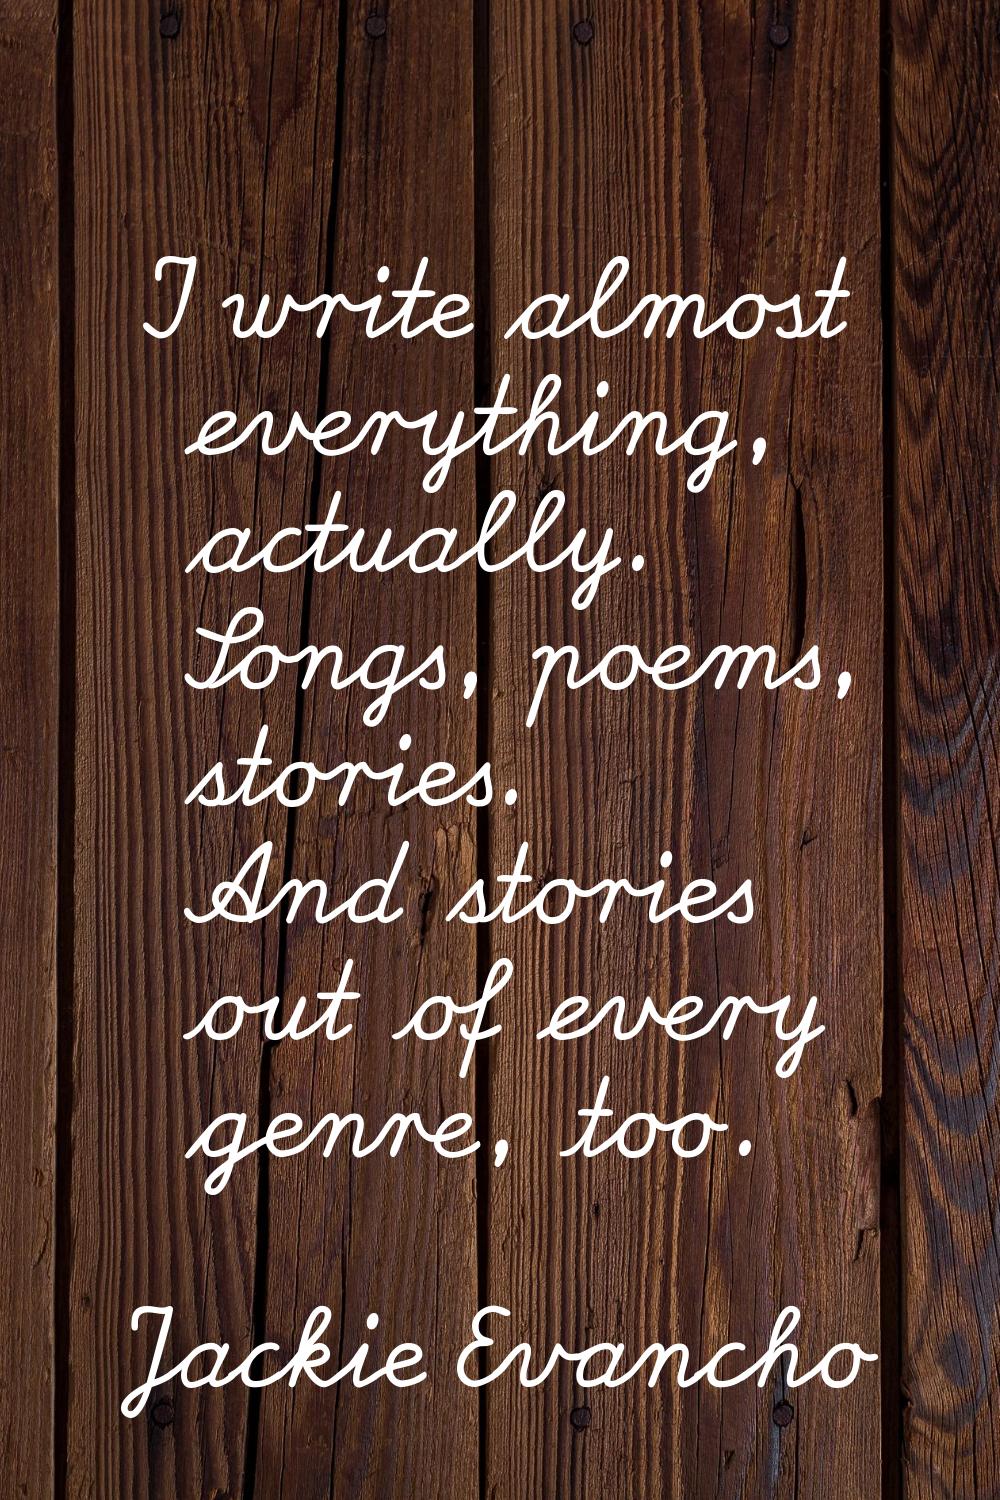 I write almost everything, actually. Songs, poems, stories. And stories out of every genre, too.